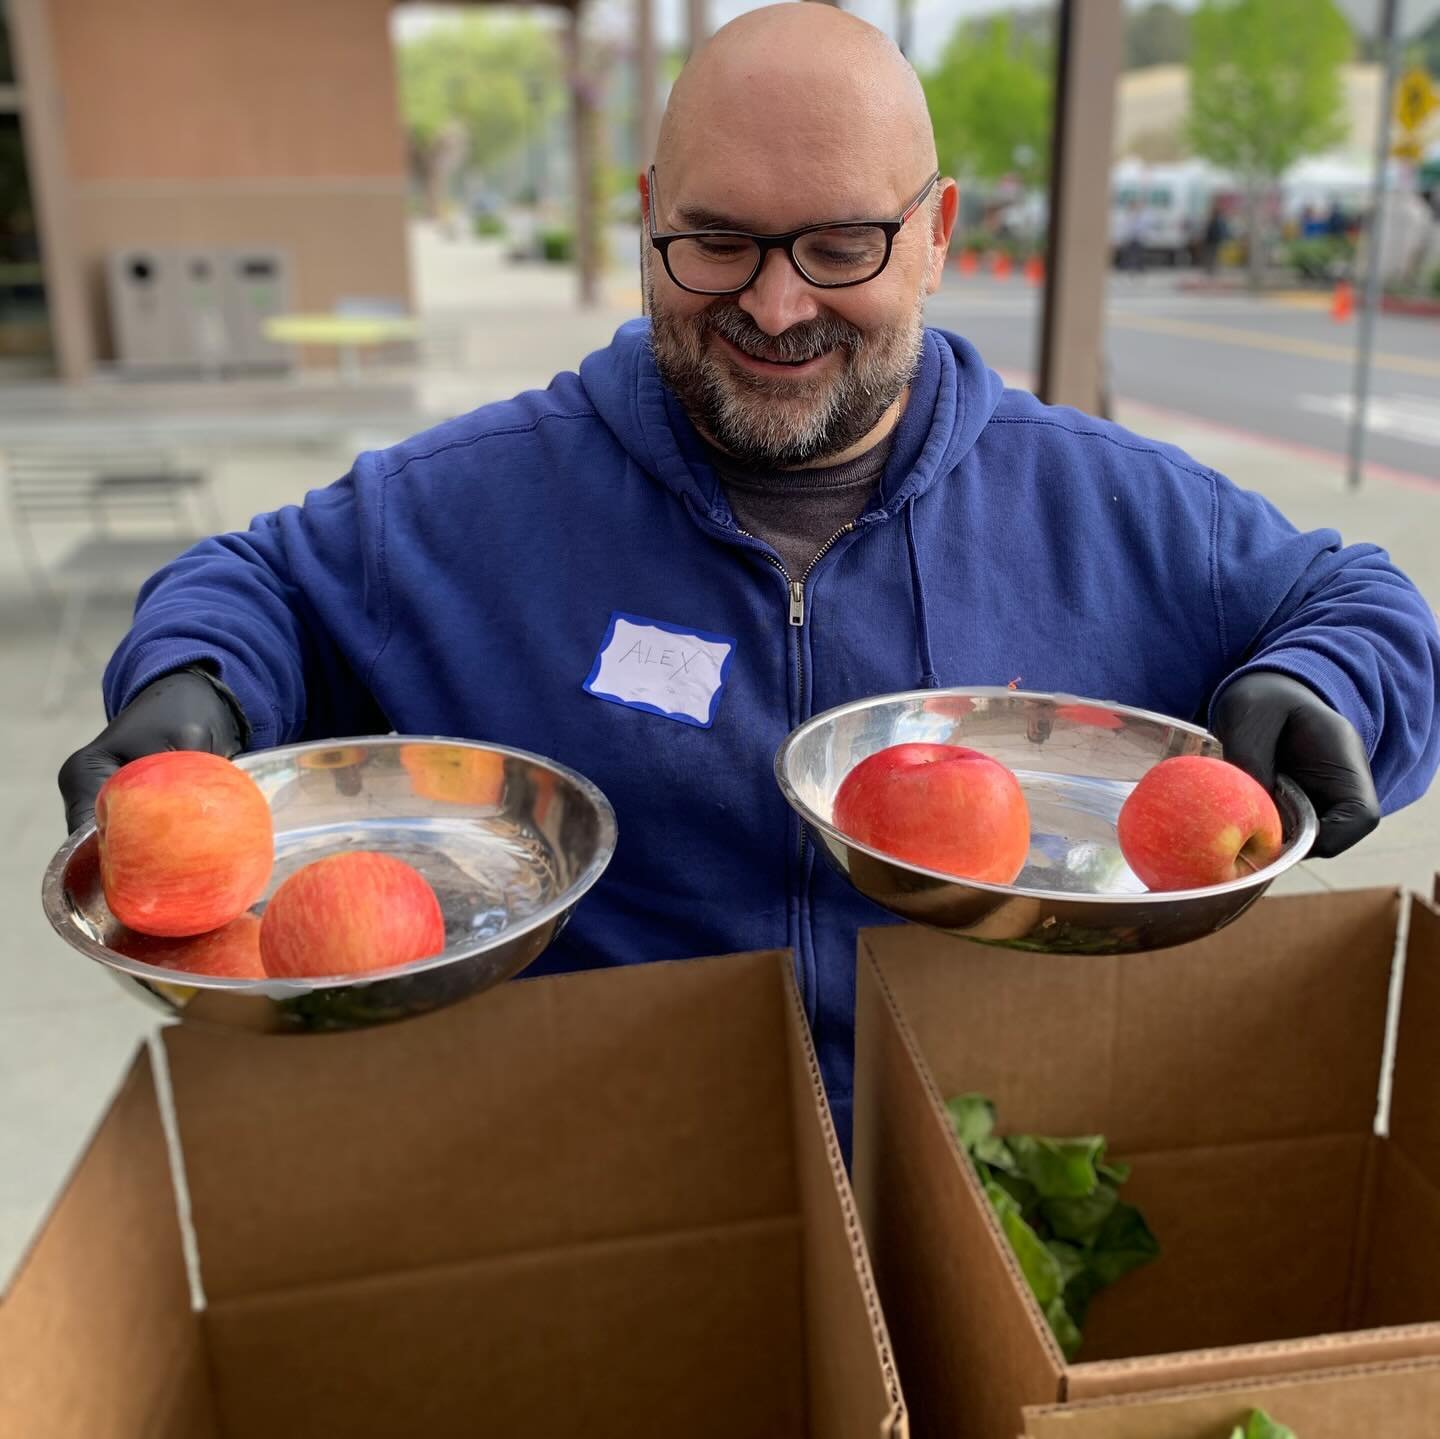 A huge shoutout to the #BofAVolunteers who joined us to lend their hands in curating a bountiful produce box! Together, we filled it with the freshest local fruits and vegetables, ensuring that our community gets access to nutritious and delicious go